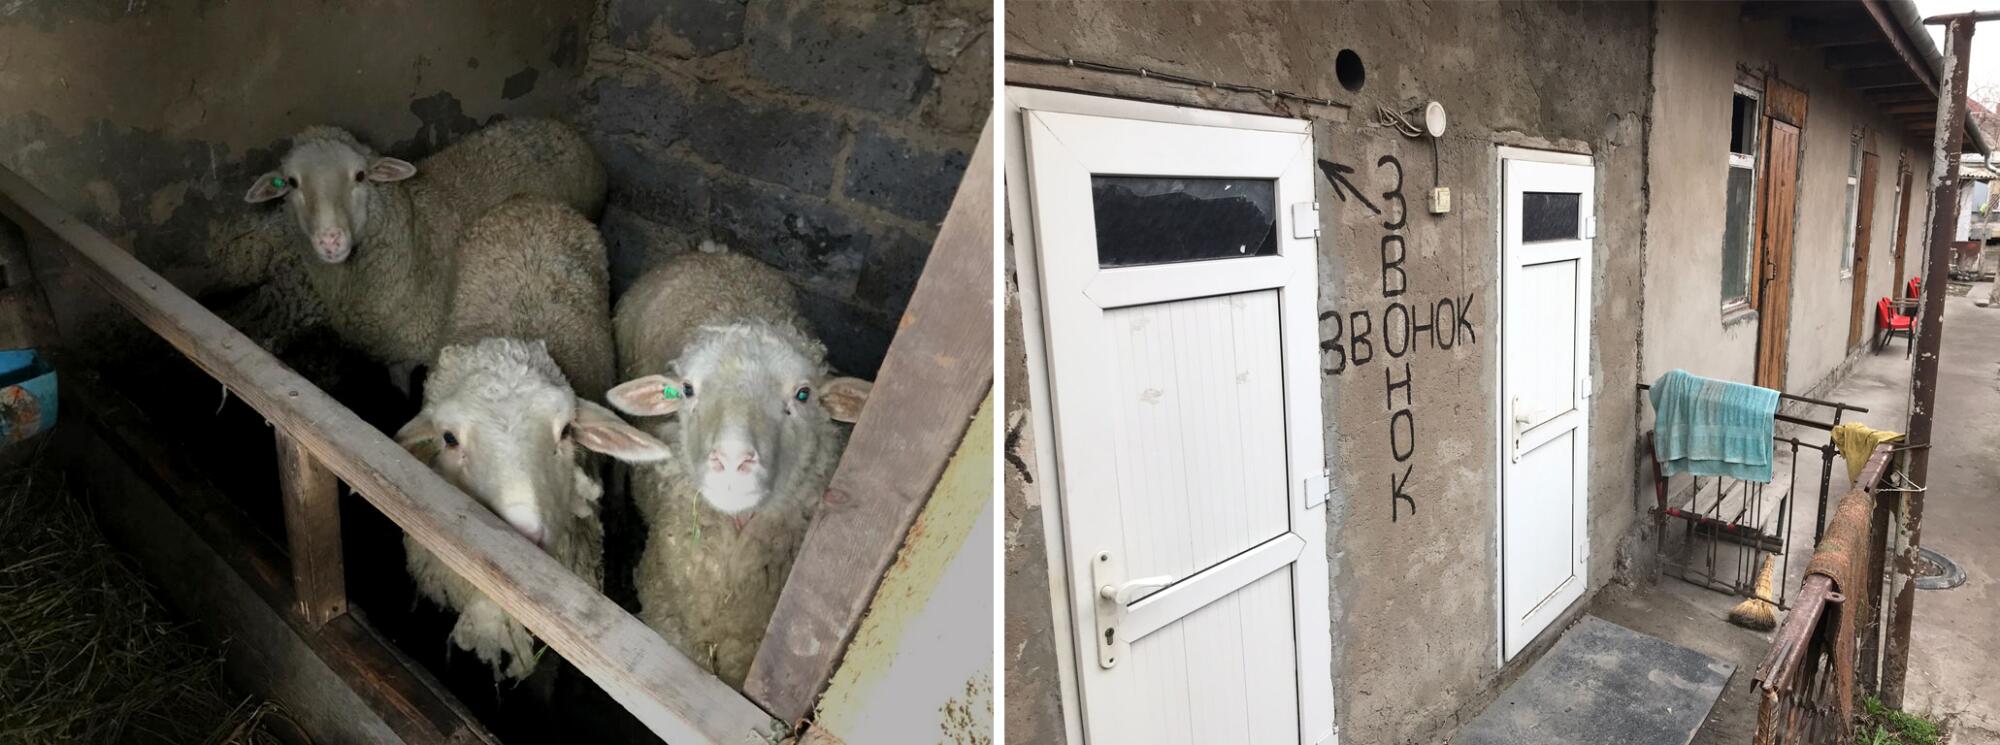 At left, a photo of three sheep in an indoor pen; at right, the exterior of a building with two white doors 